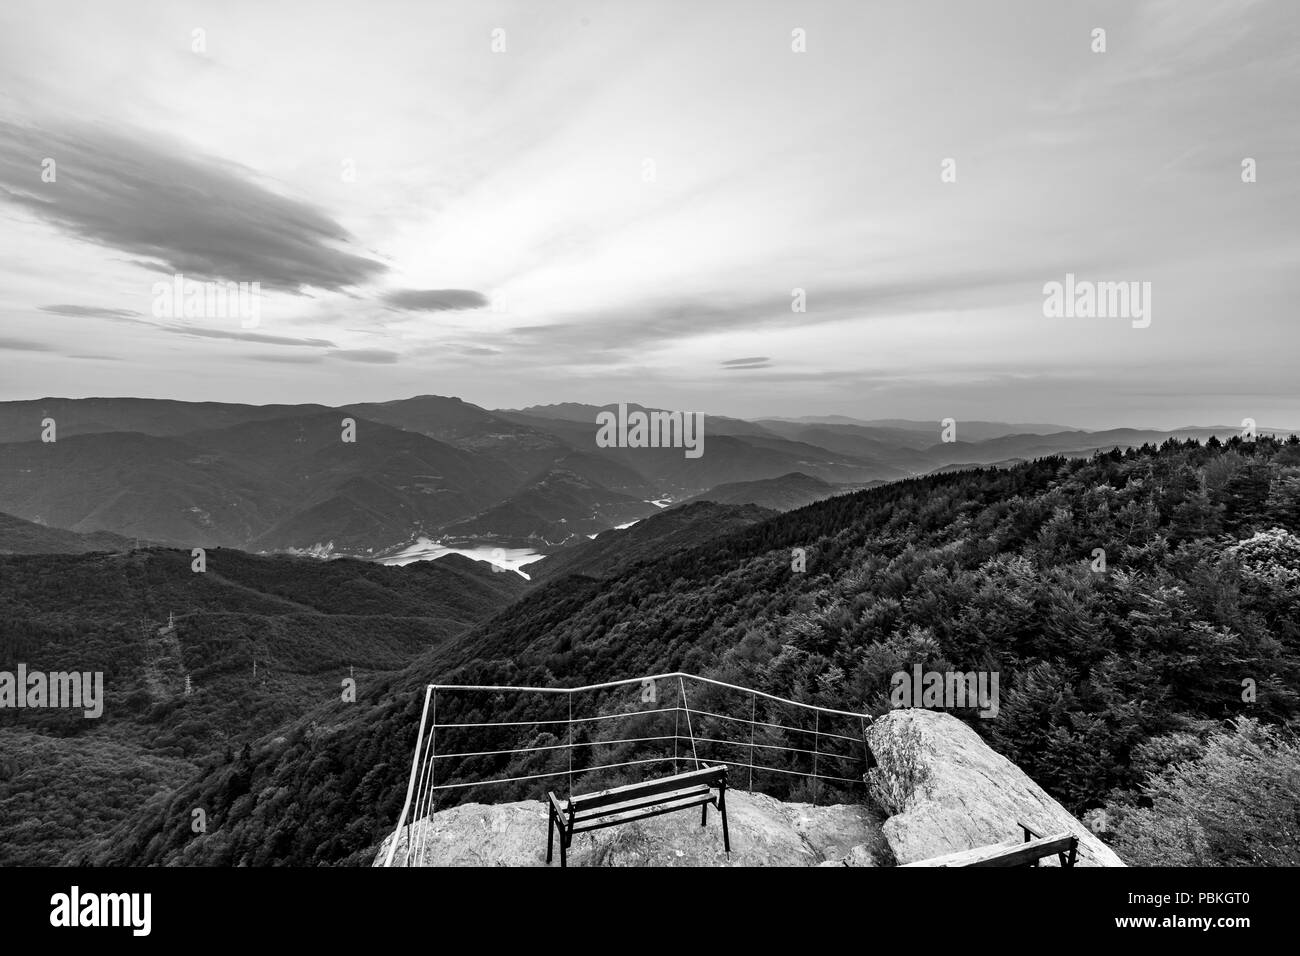 Calm scenery springtime black and white landscape, high altitude observation deck view with picturesque rocks and wooden bench in Rhodope mountain nea Stock Photo